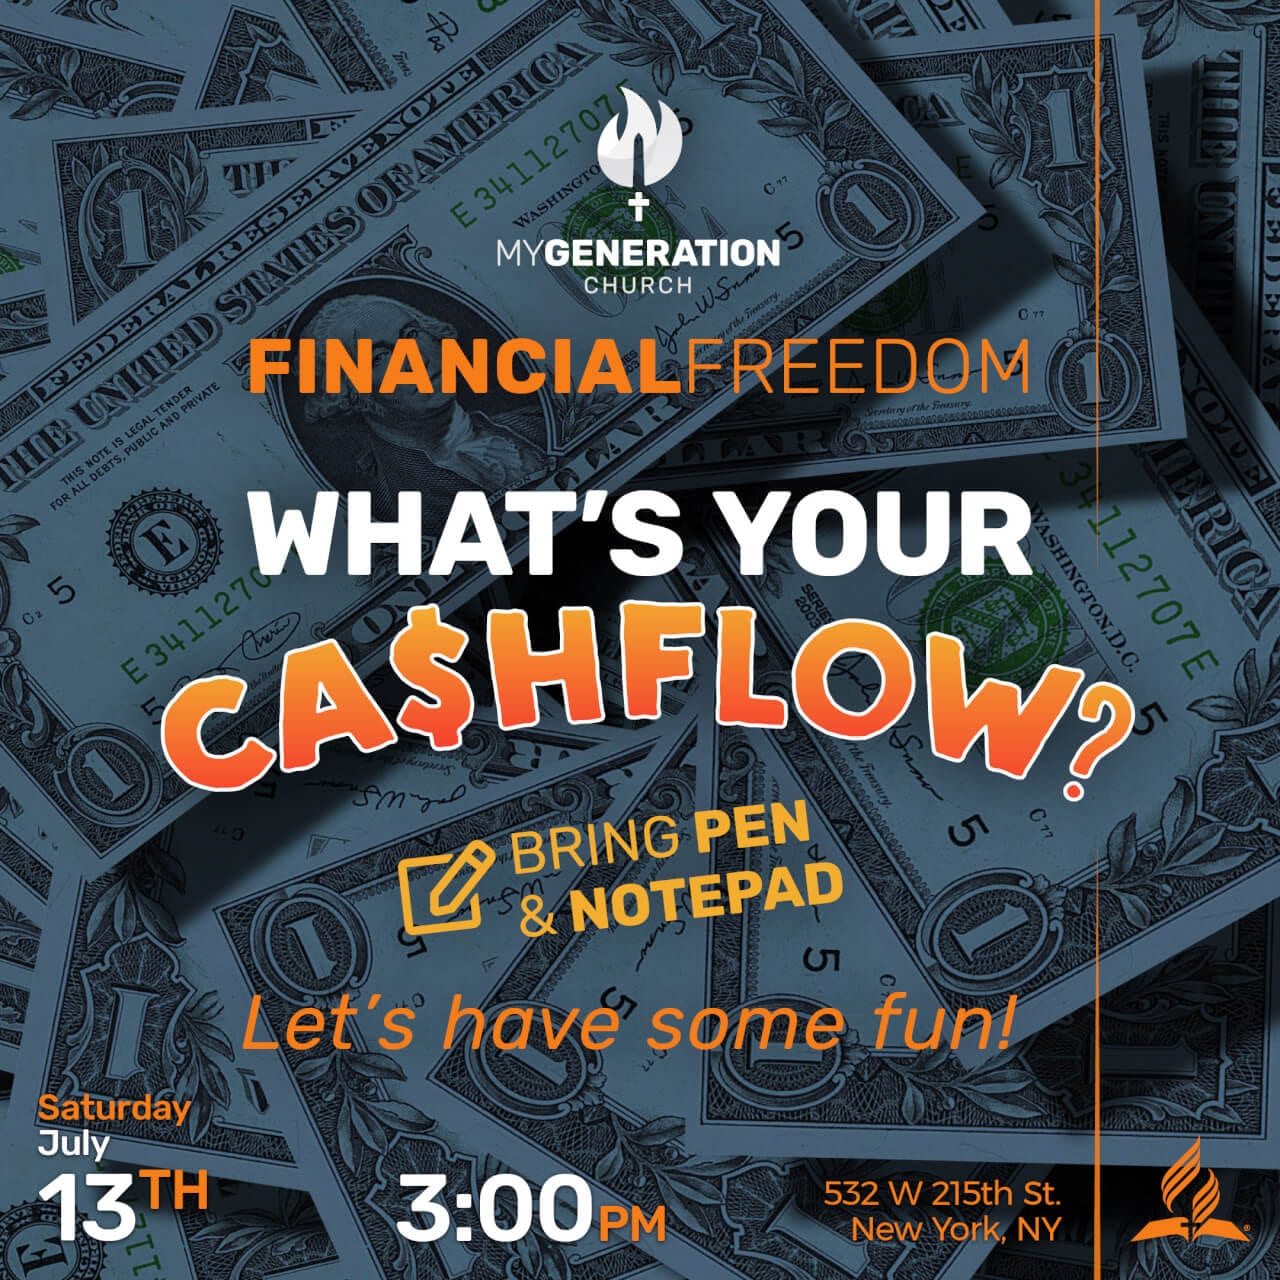 Financial Freedom - What's Your Cashflow?